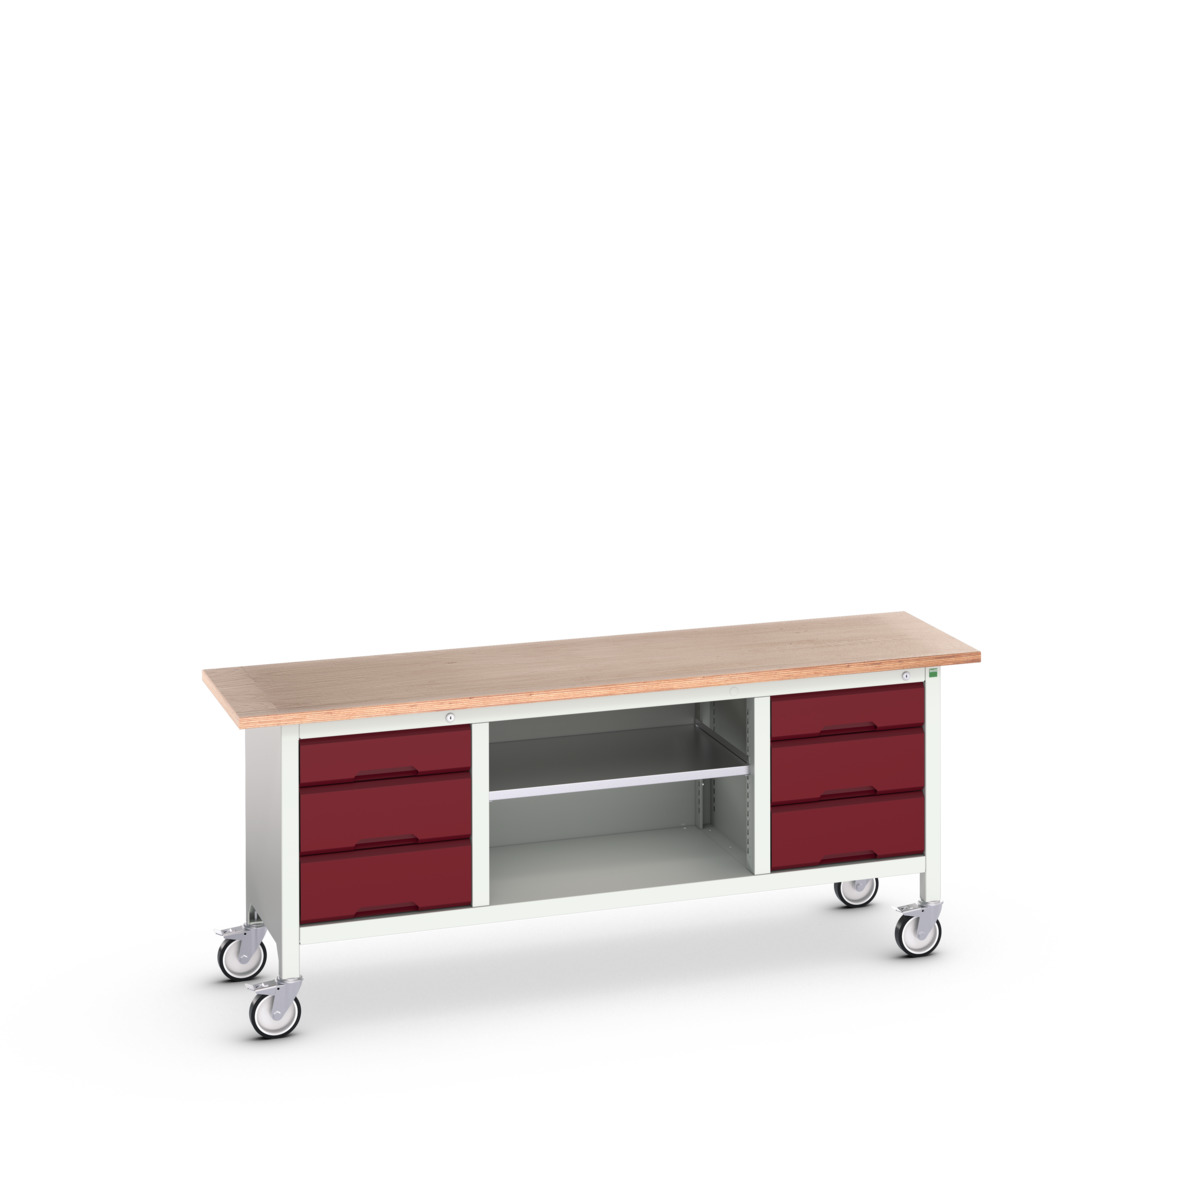 16923234.24 - verso mobile storage bench (mpx)